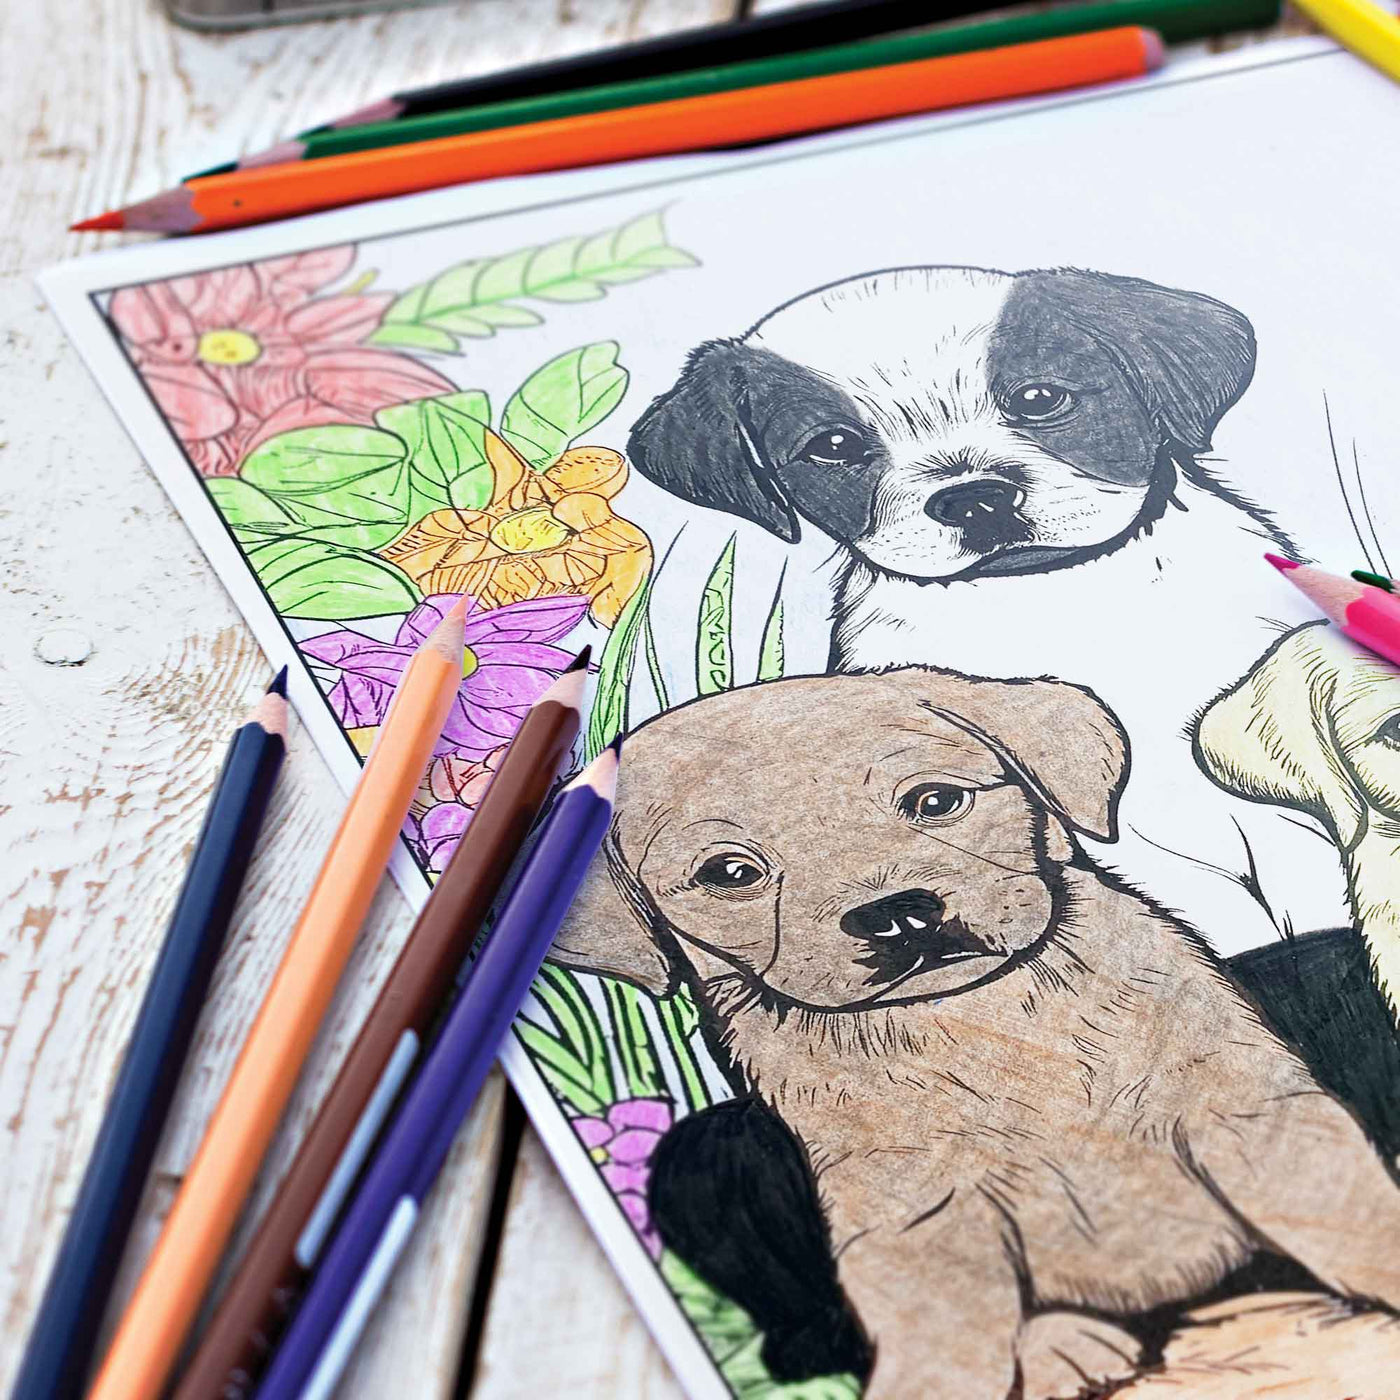 Dog themed coloring pages being colored in